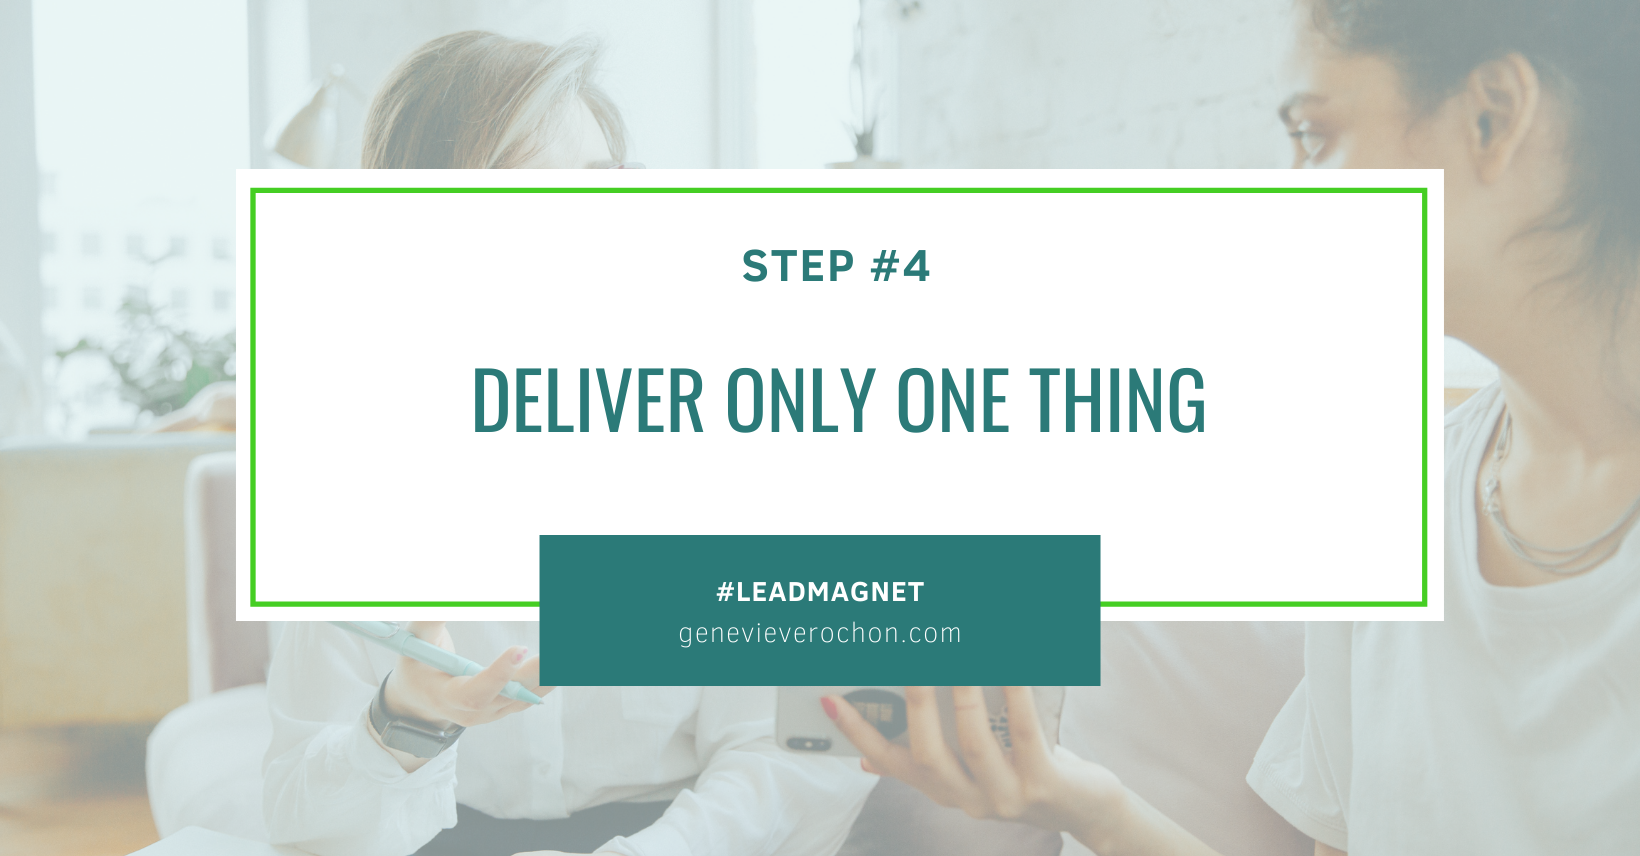 Your lead magnet should only deliver one thing